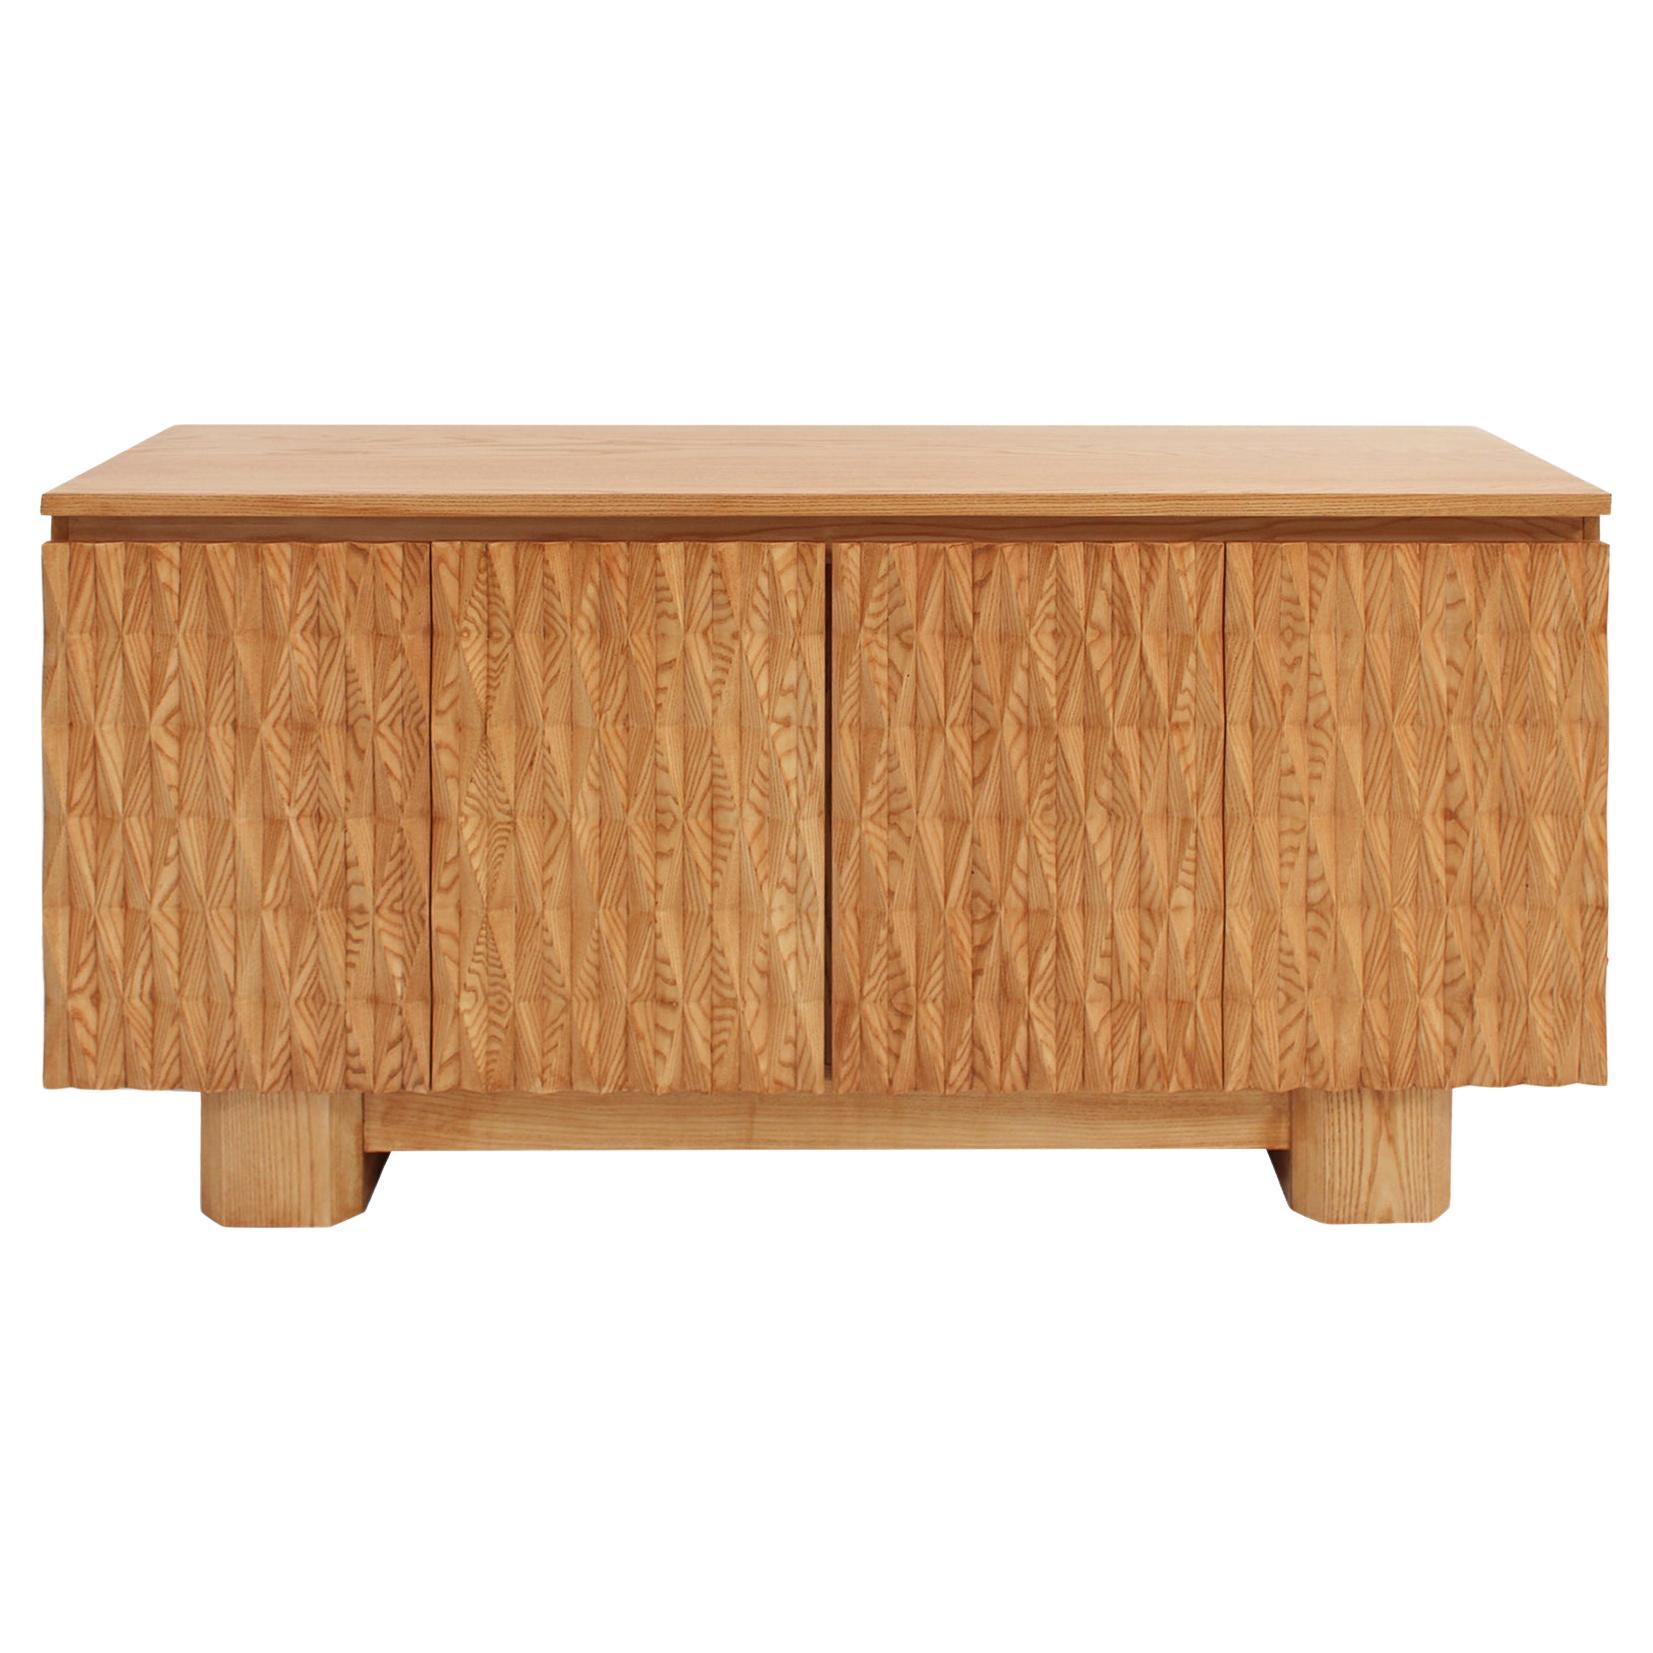 Hand-carved Oak Brutalist Style Sideboard with Four Doors, Italy